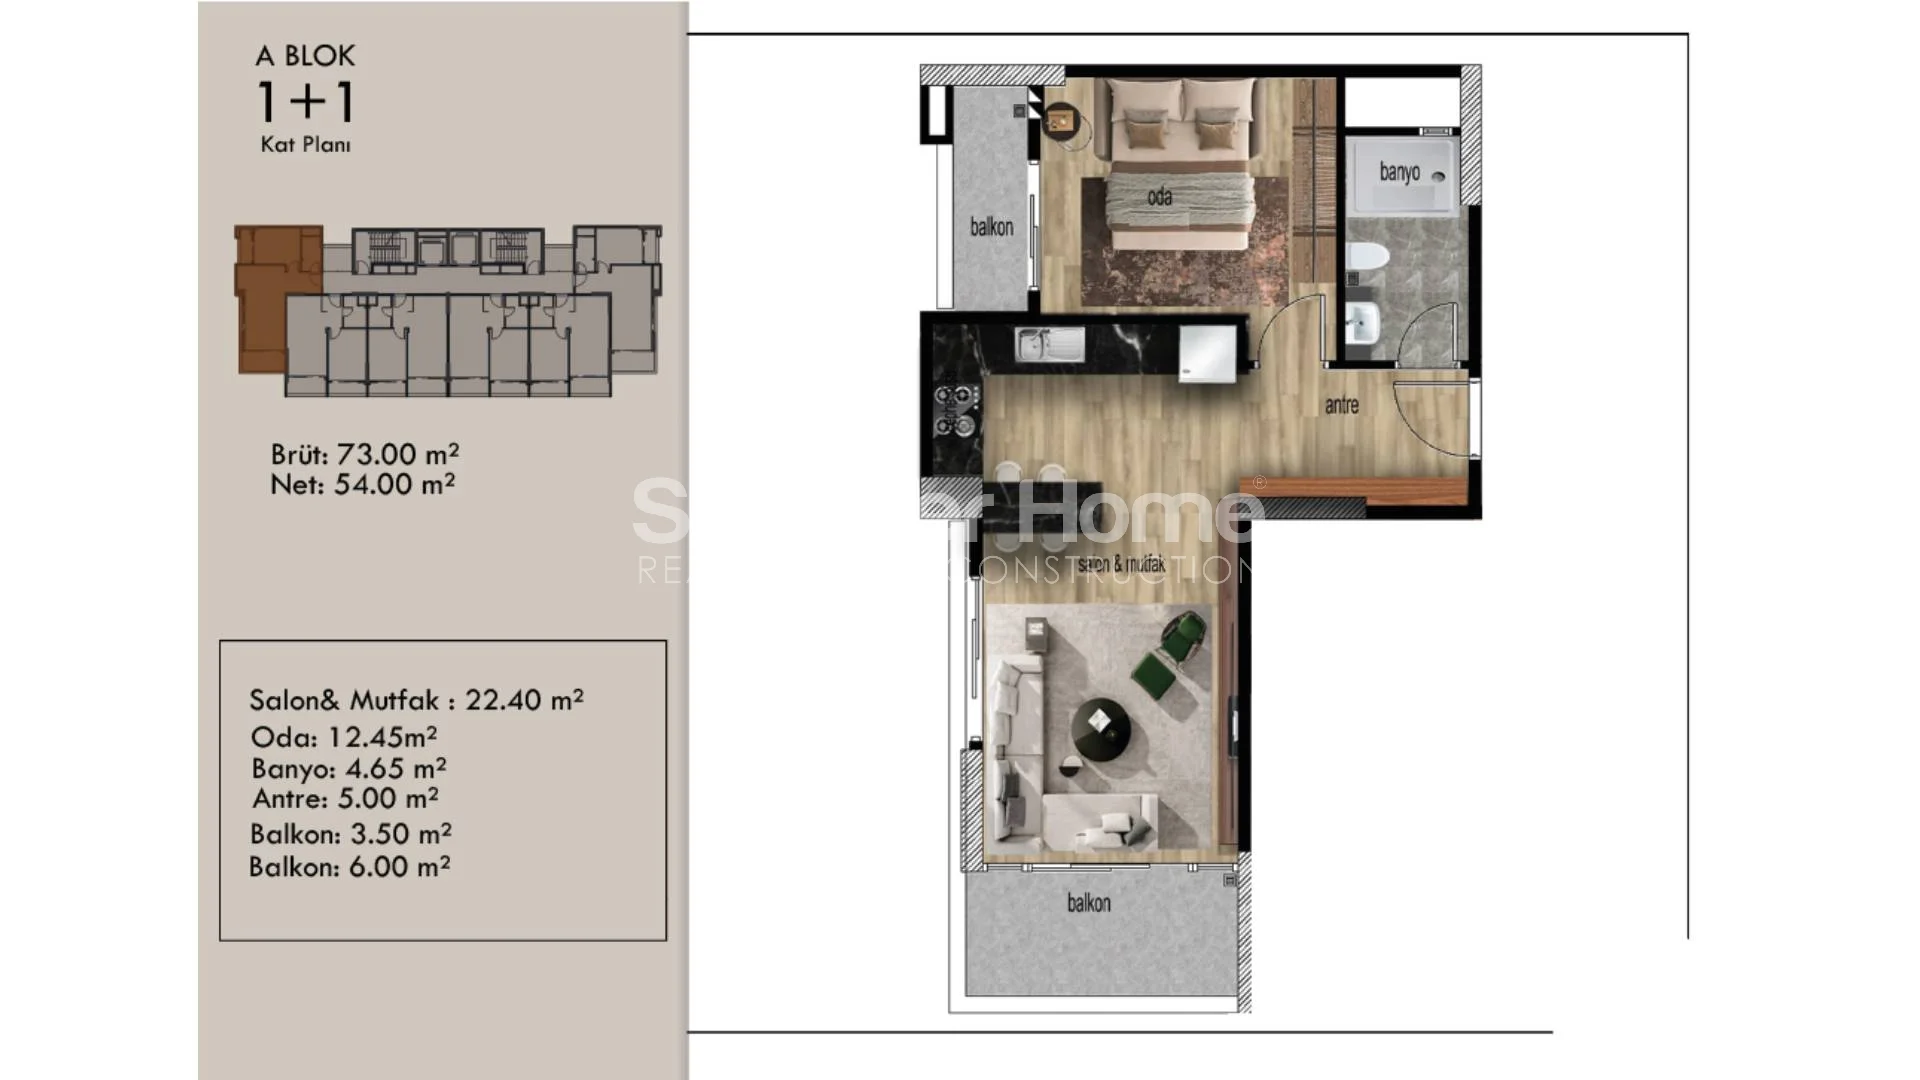 Cheap One-Bedroom Apartments in Arpacbahsis, Mersin Plan - 31